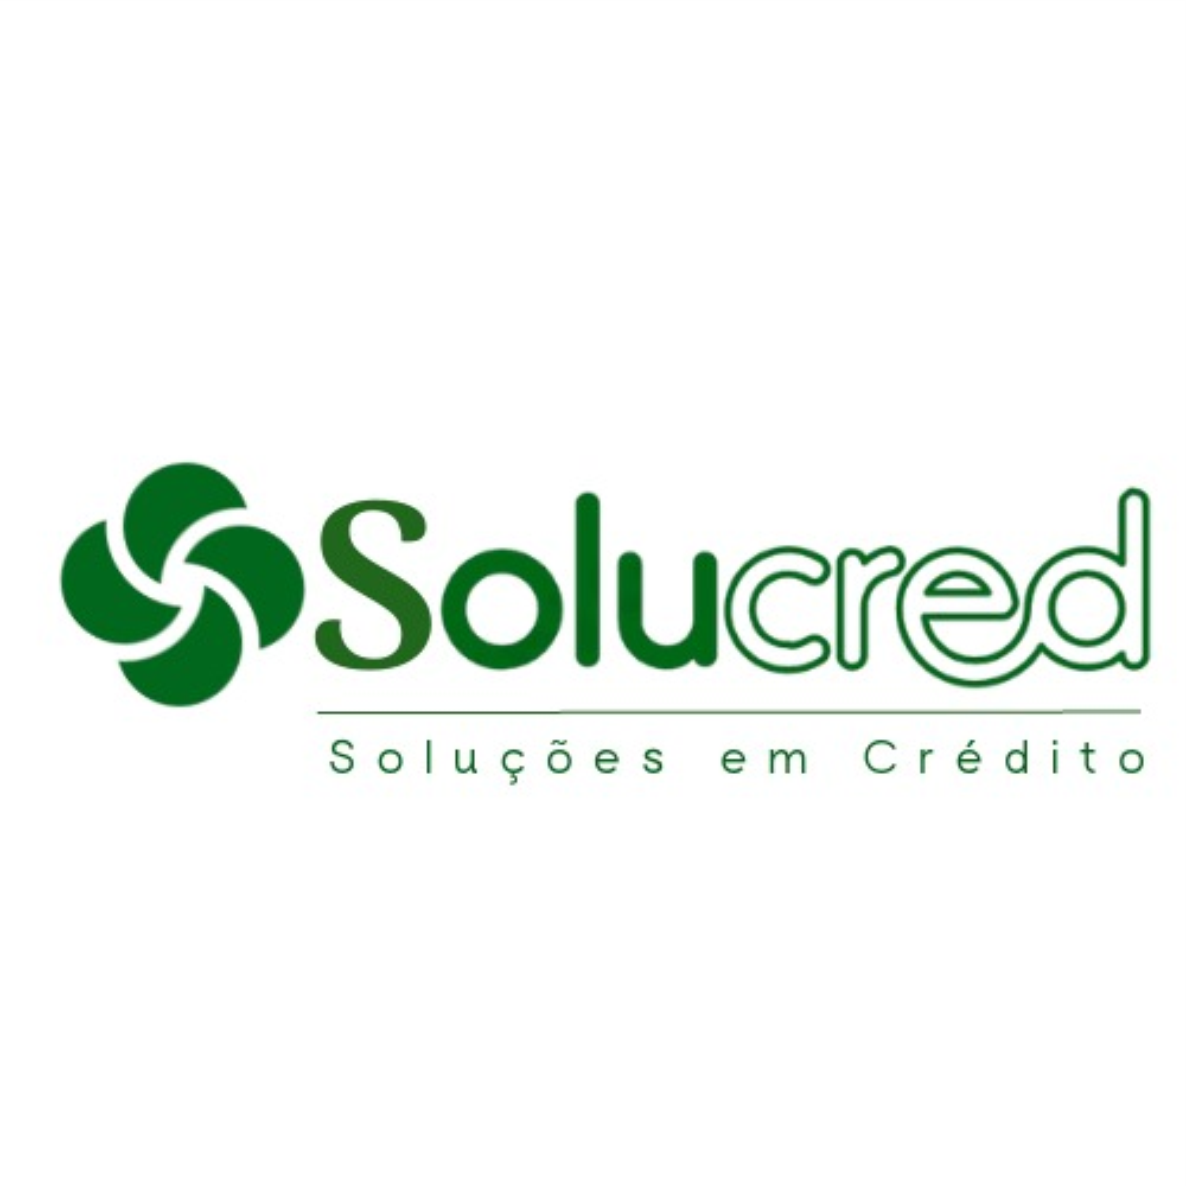 SOLUCRED